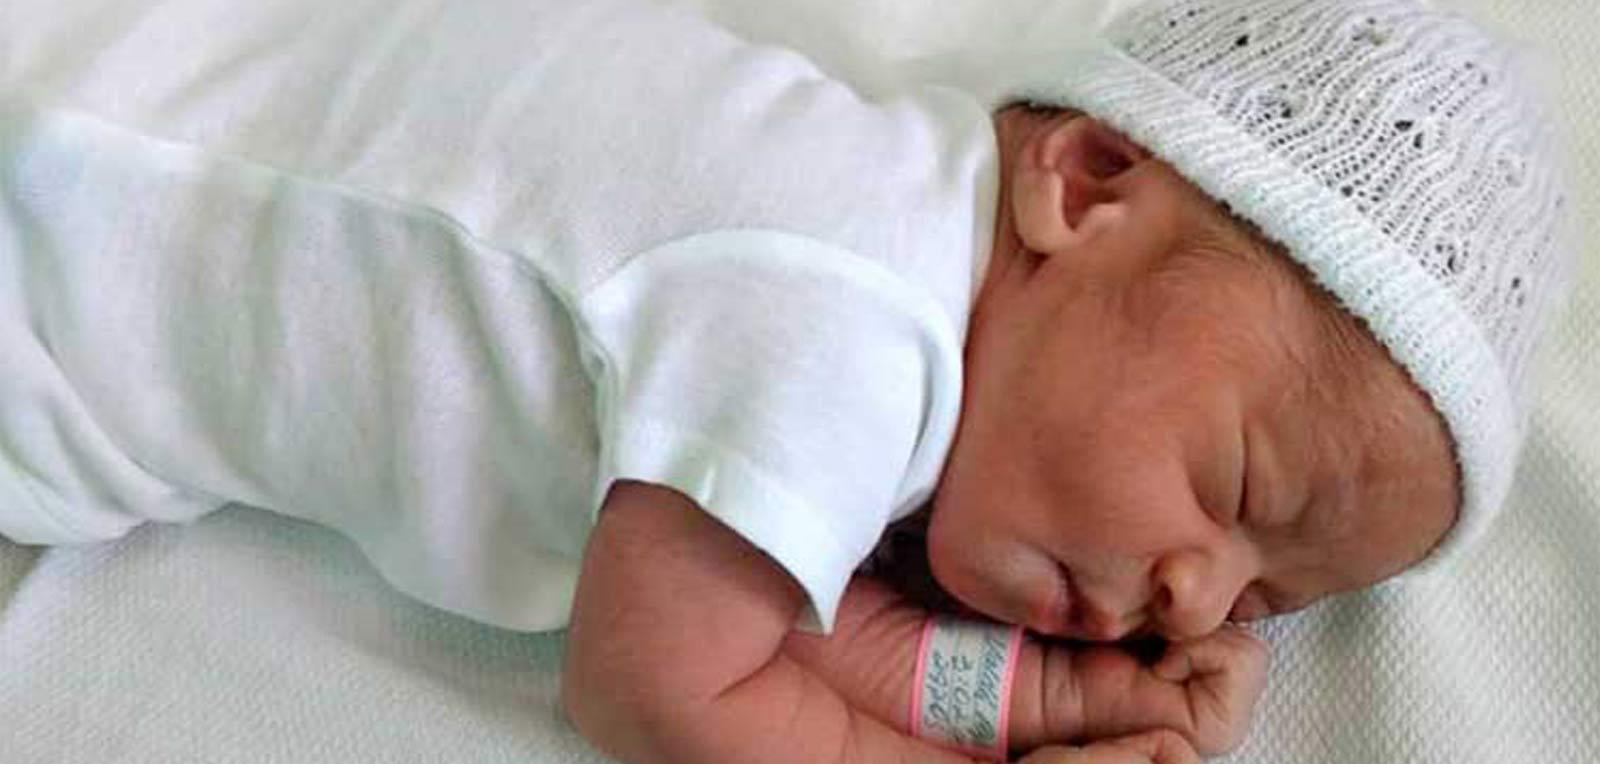 Cuban province reports low infant mortality rate